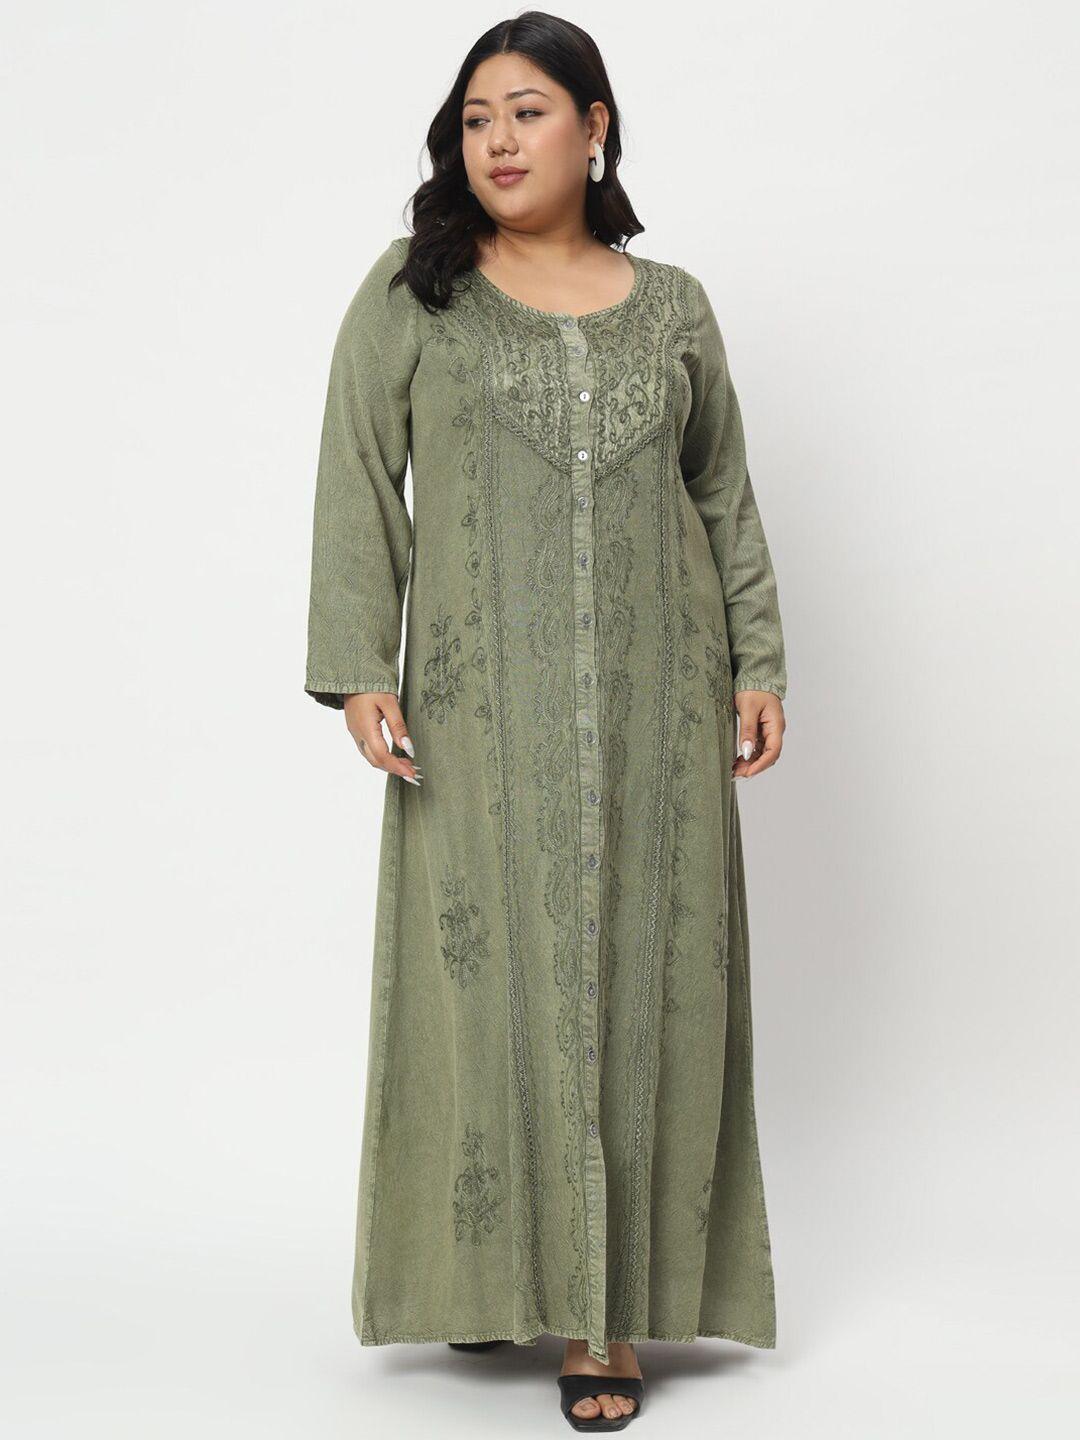 veldress-green-floral-embroidered-fit-&-flare-maxi-dress